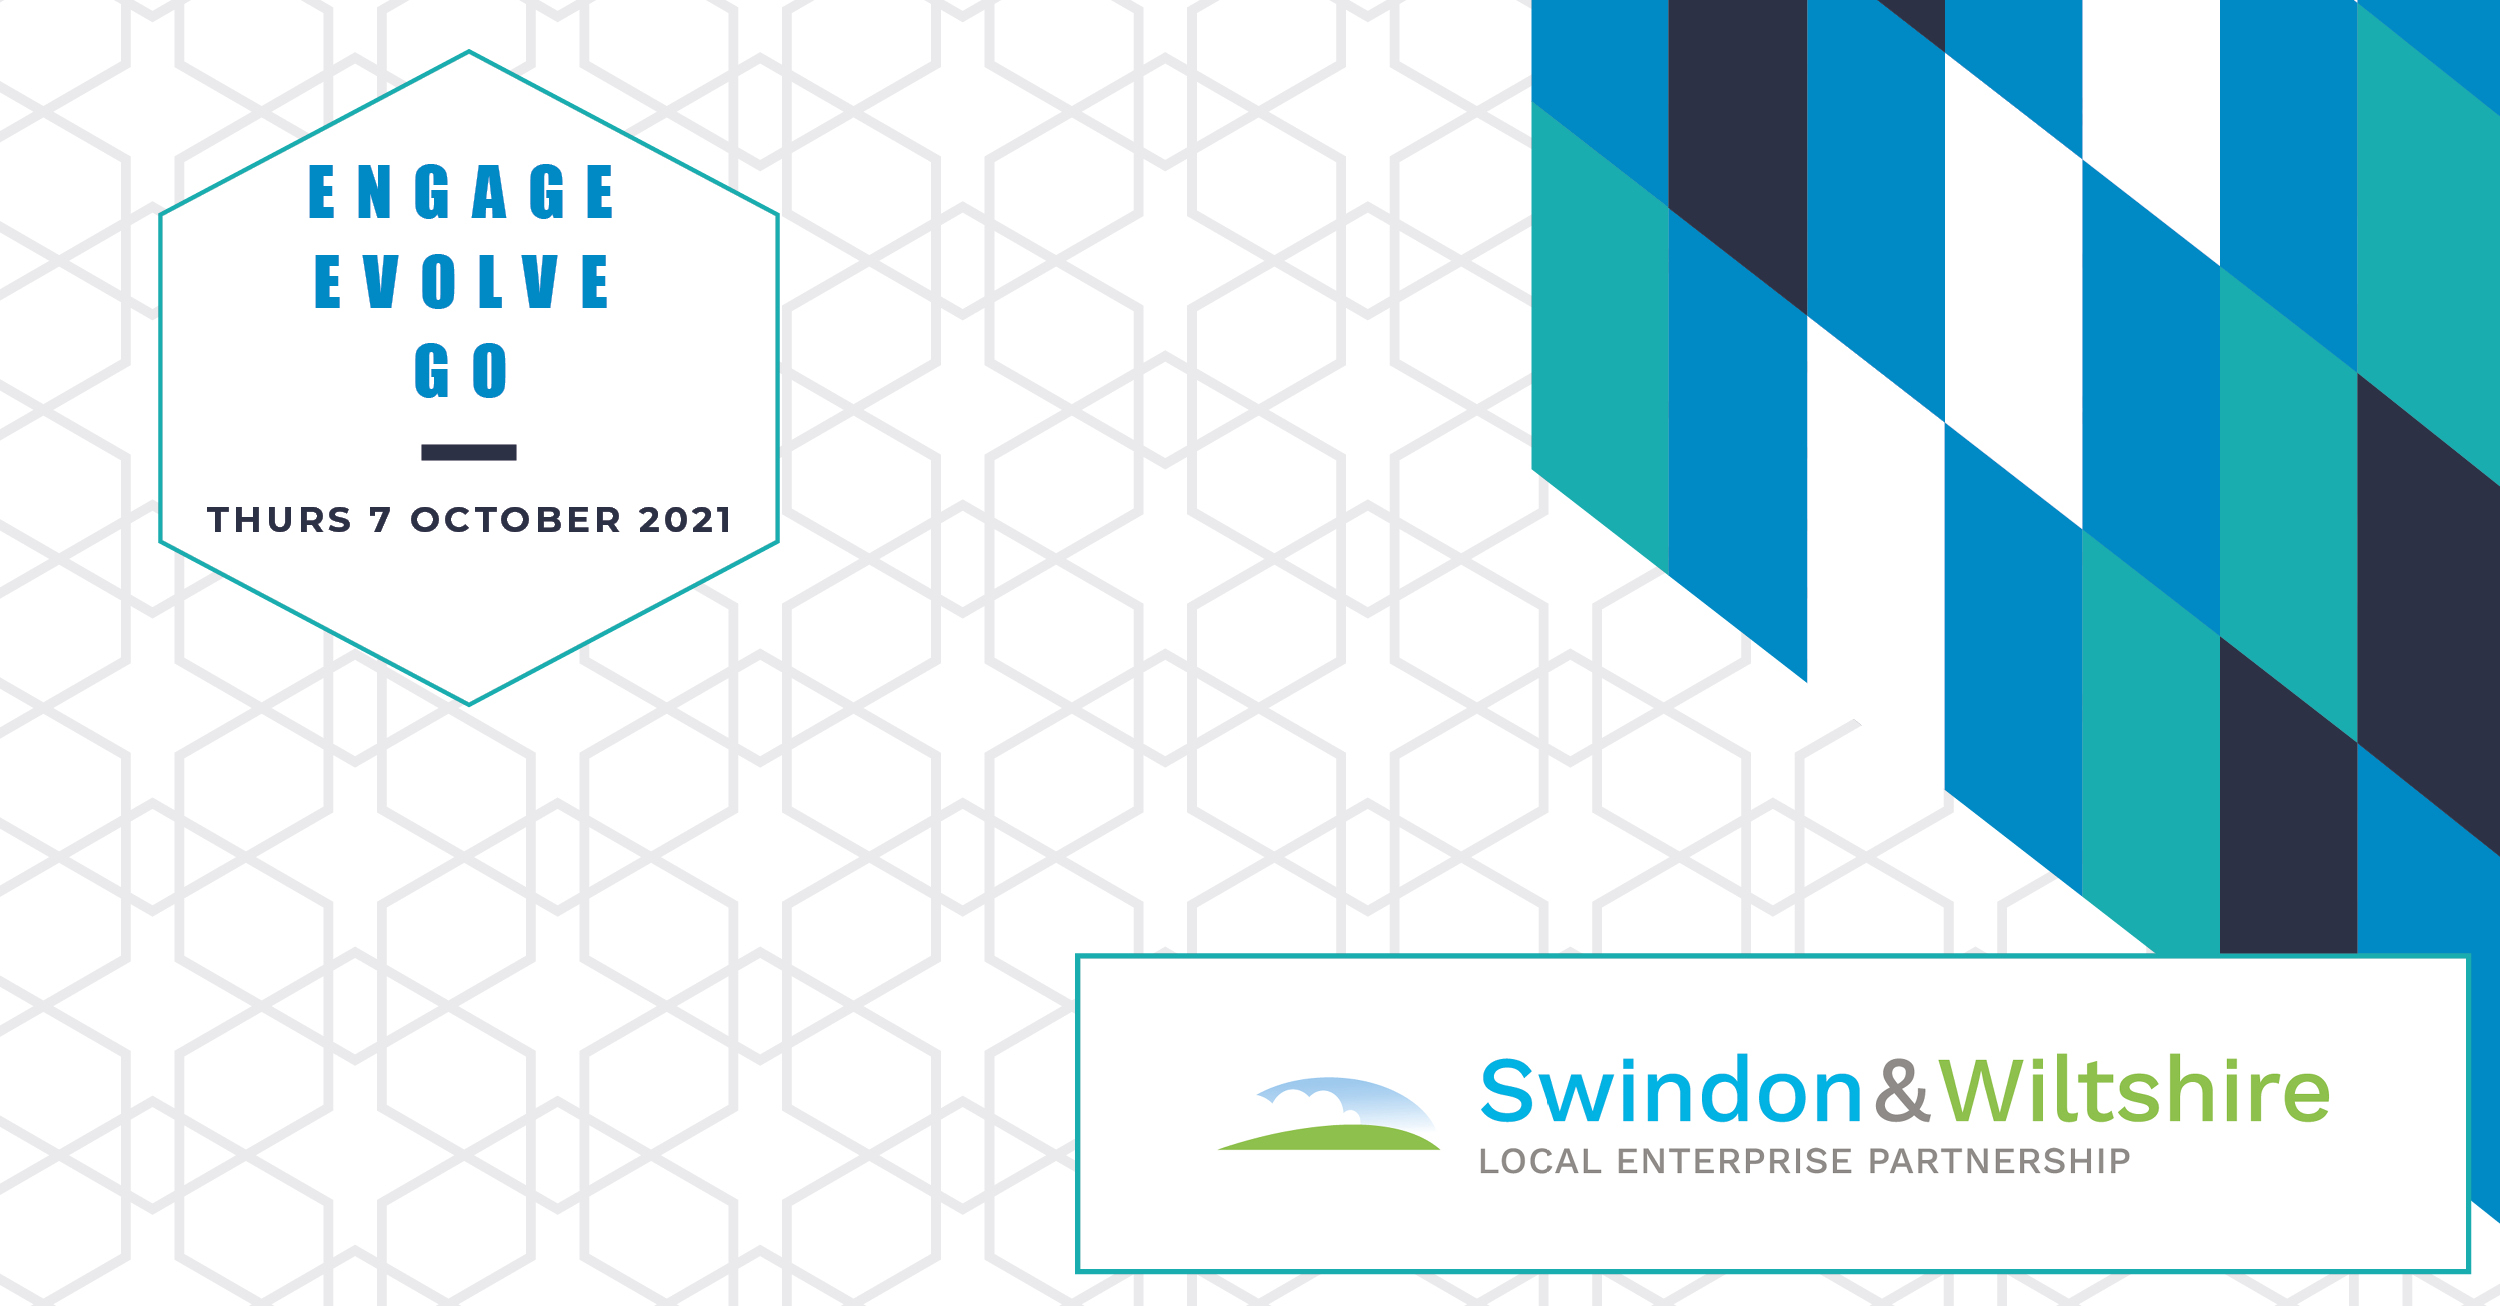 The Swindon and Wiltshire Annual Conference and Expo – Engage, Evolve, Go!